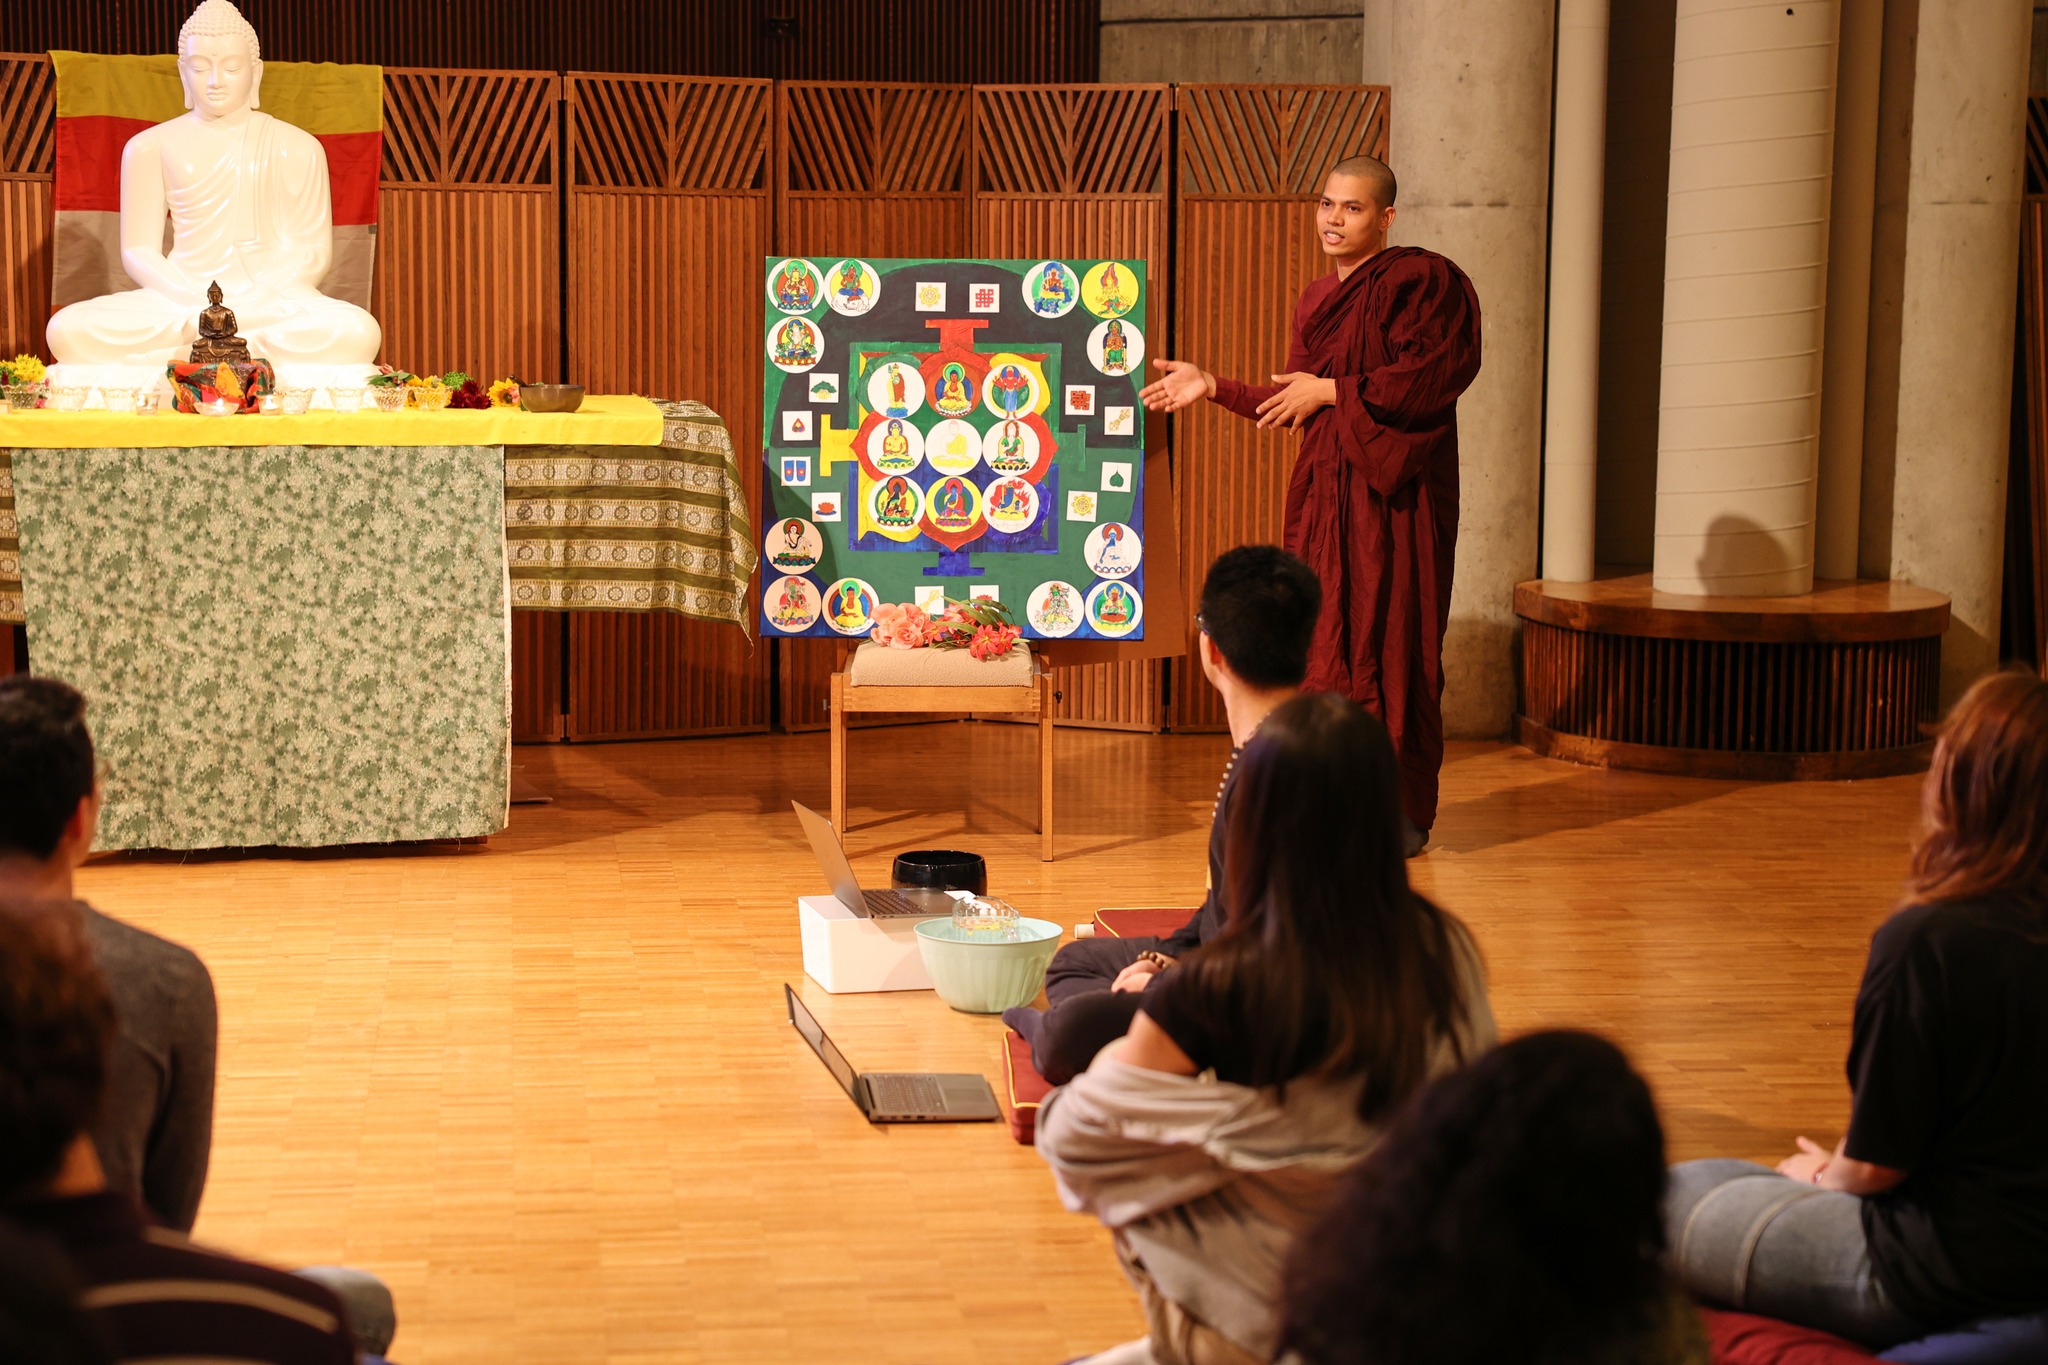 The Venerable Priya Sraman speaking to the group at the Bodhi Day event on December 8, 2022 at Emory University. (Photo credit: Bennett Kane) 